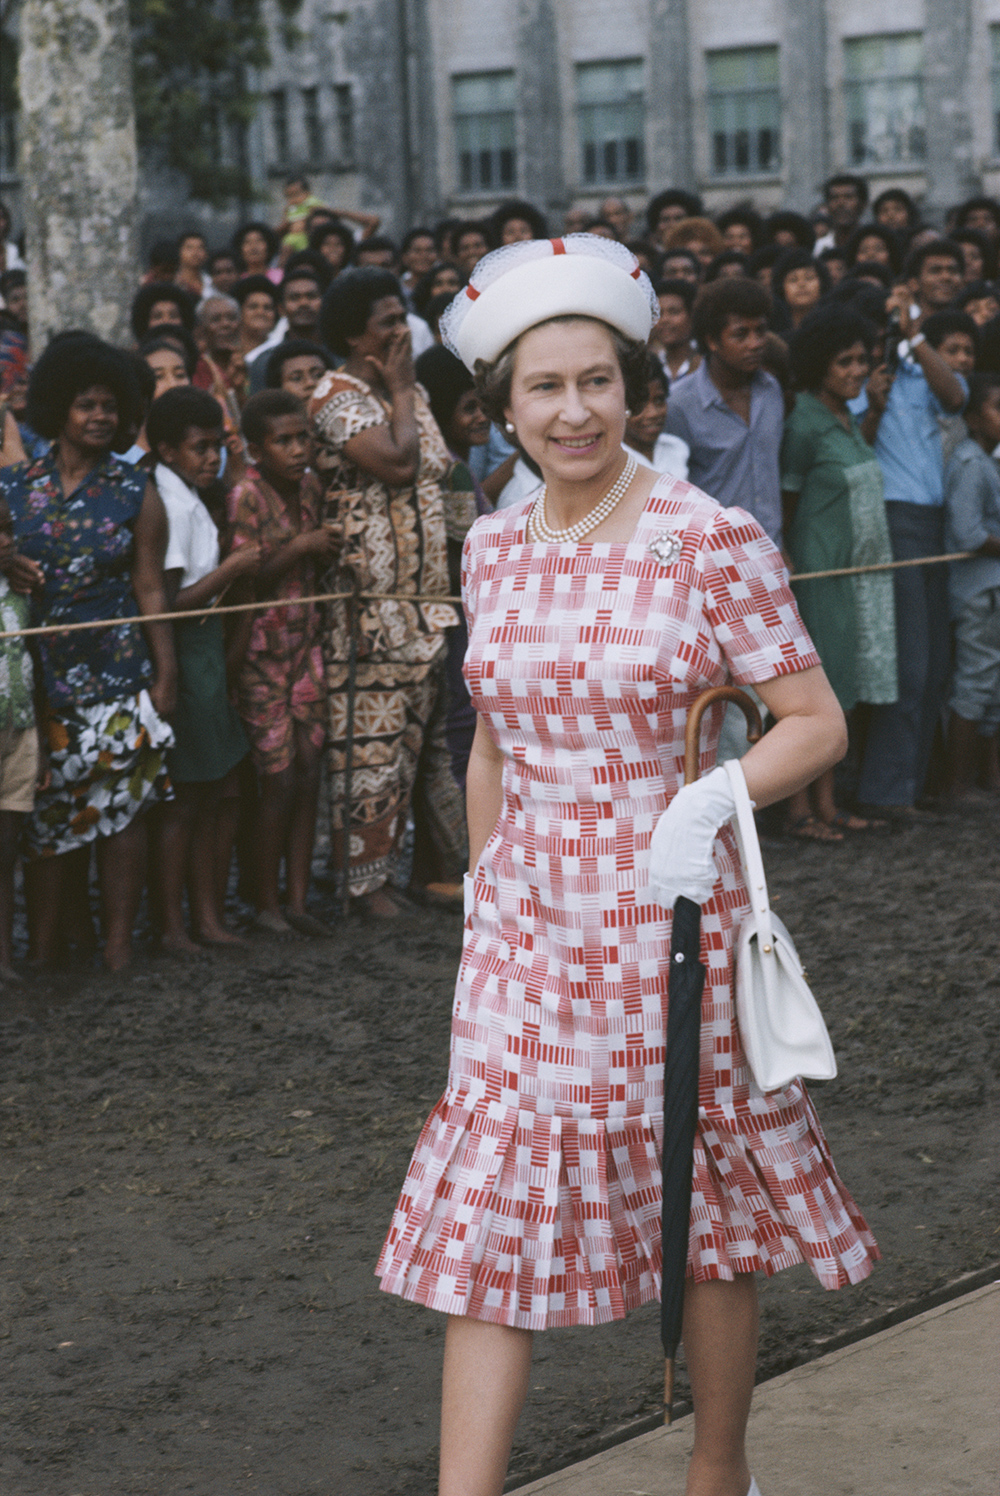 Queen Elizabeth II dons a geometric print dress for a visit to Fiji during her 1977 Jubilee tour. Photo / Getty Images